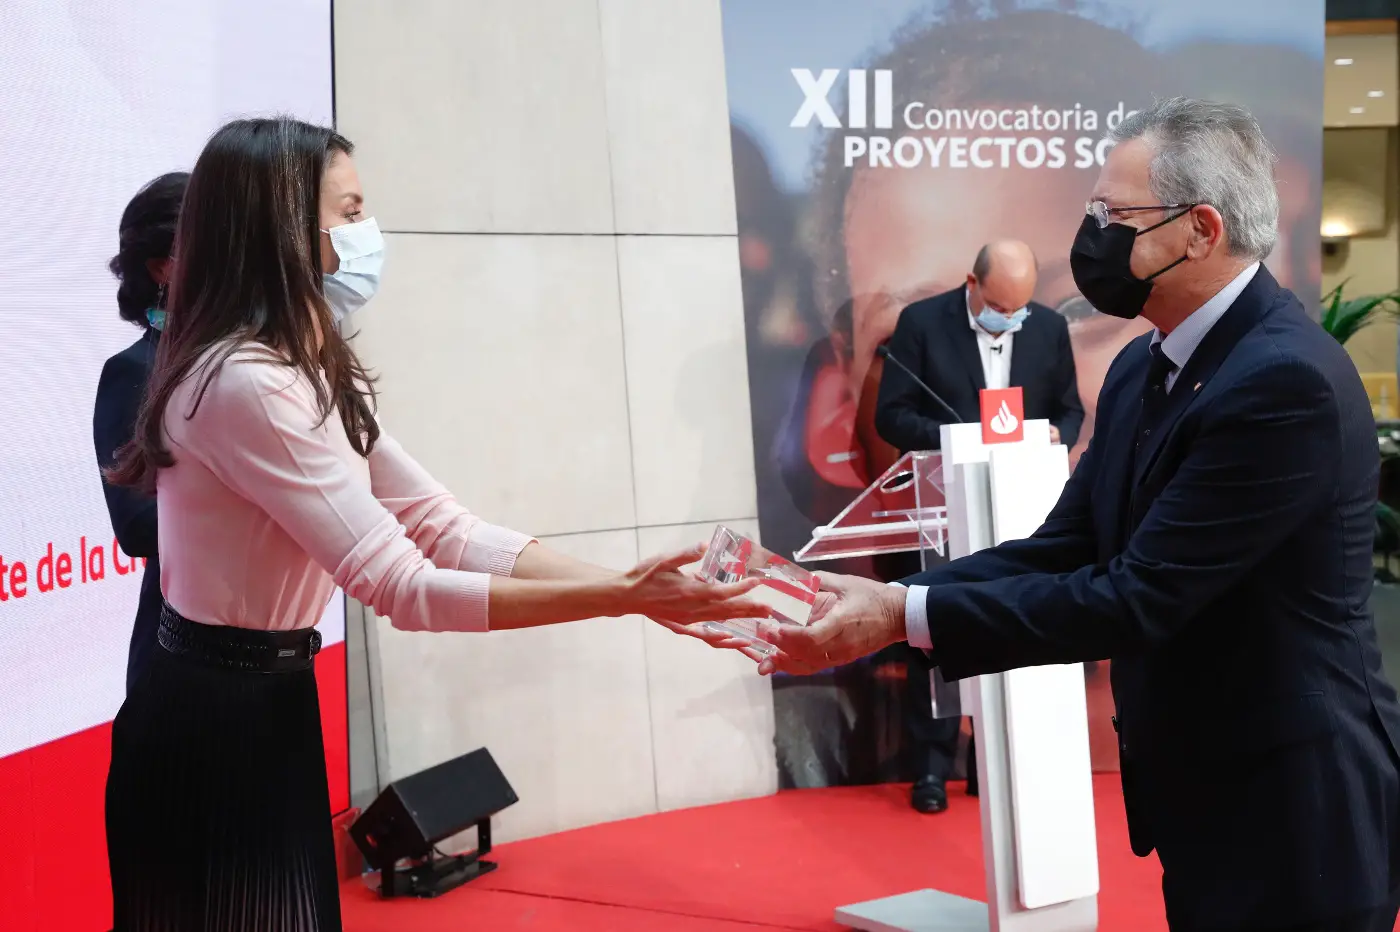 Queen Letizia presided over the closing ceremony of the XII Call for Social Projects of Banco Santander